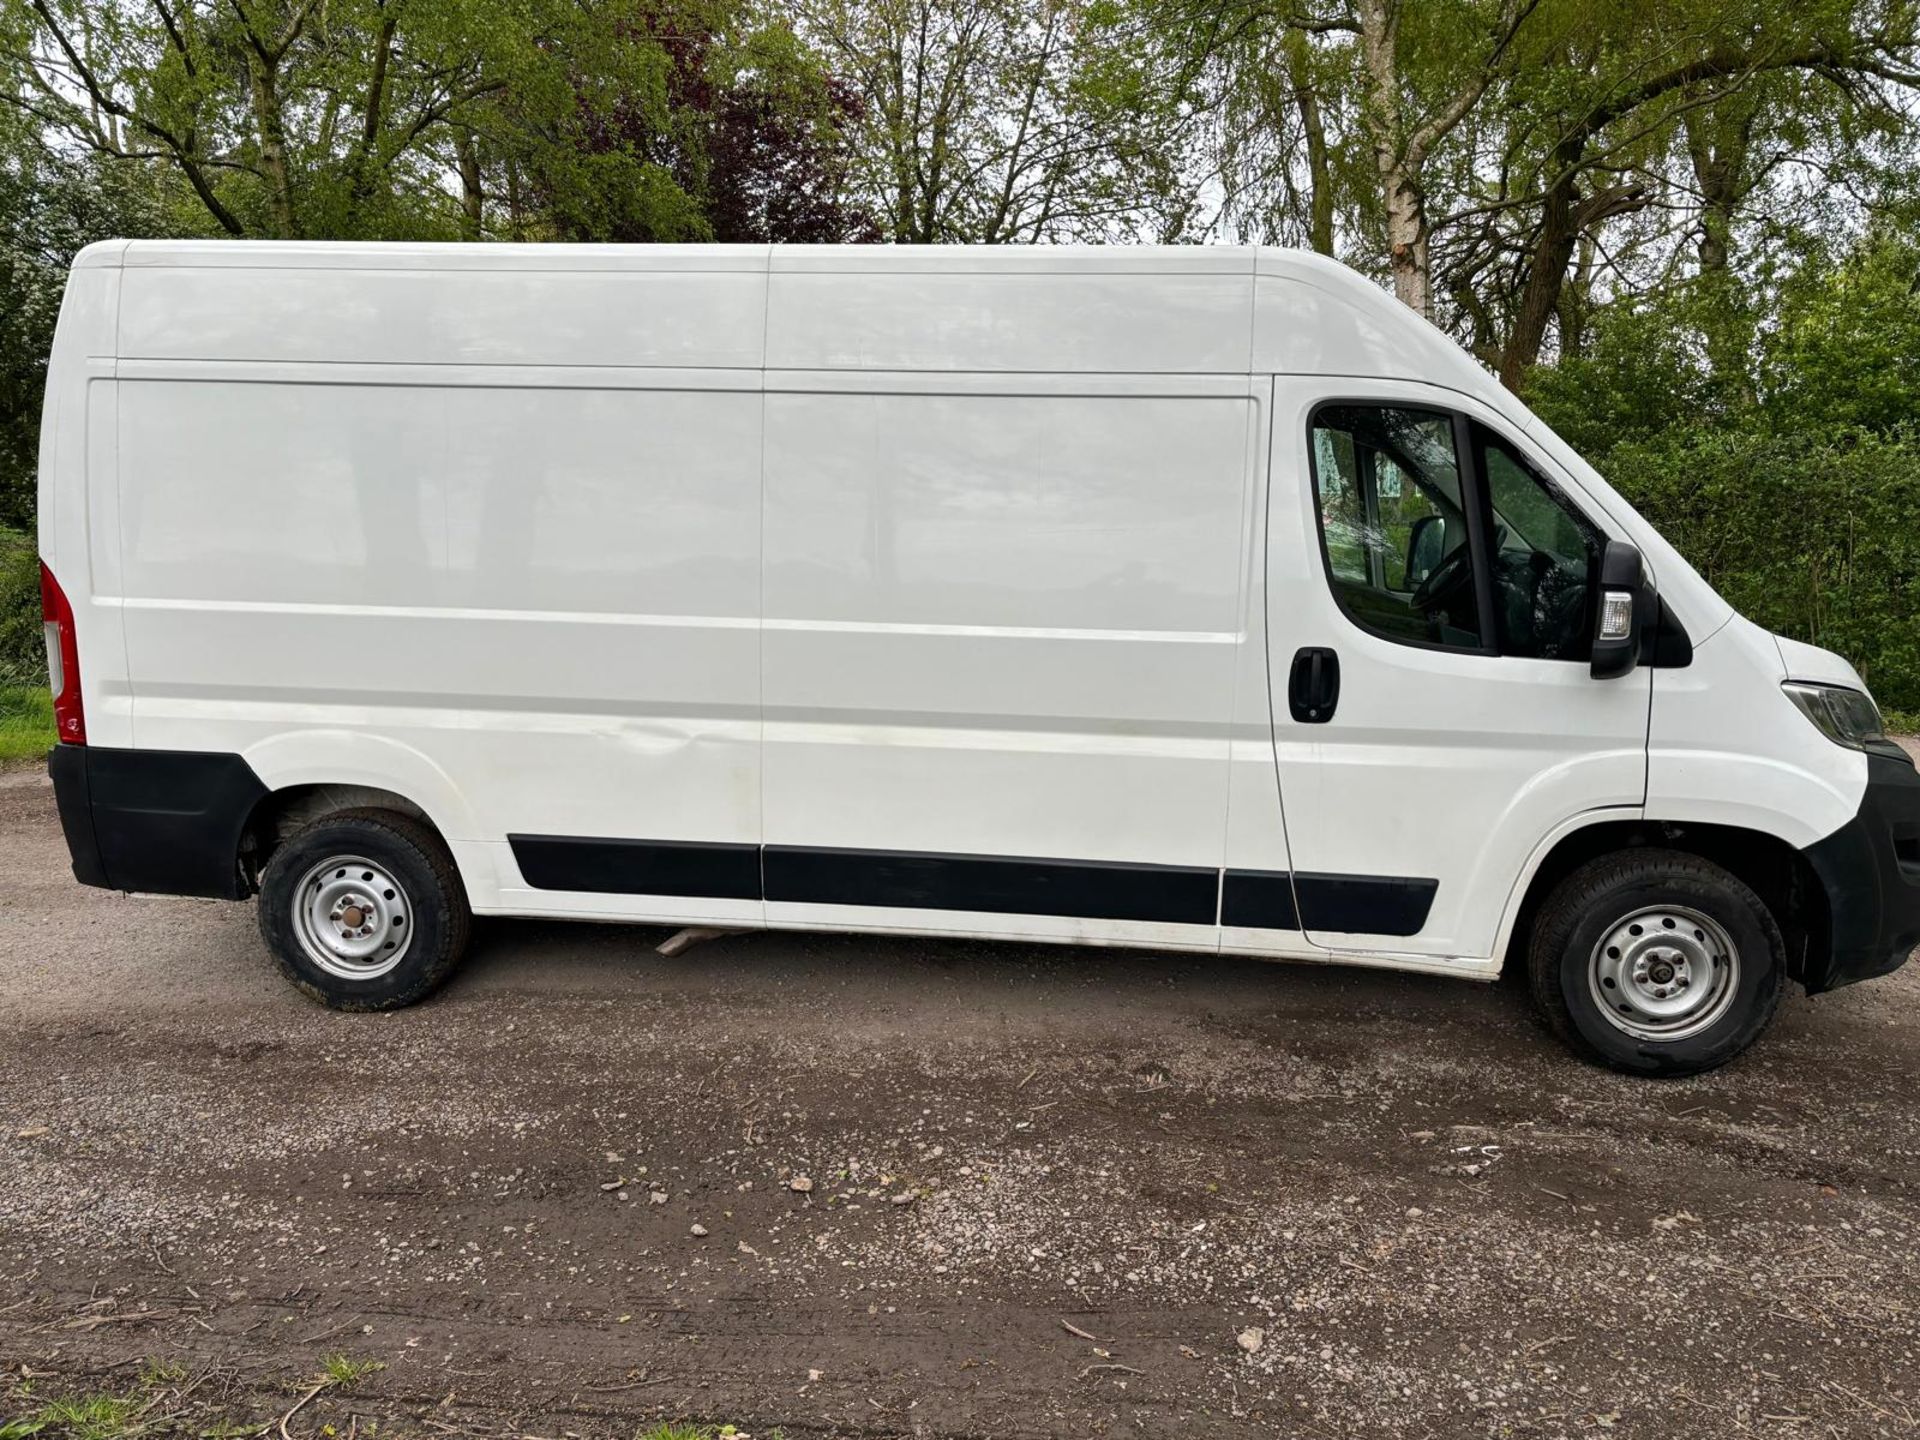 2020 20 CITROEN RELAY PANEL VAN - 2.2 6 SPEED - 109K MILES - AIR CON - EURO 6 - PLY LINED  - Image 2 of 12